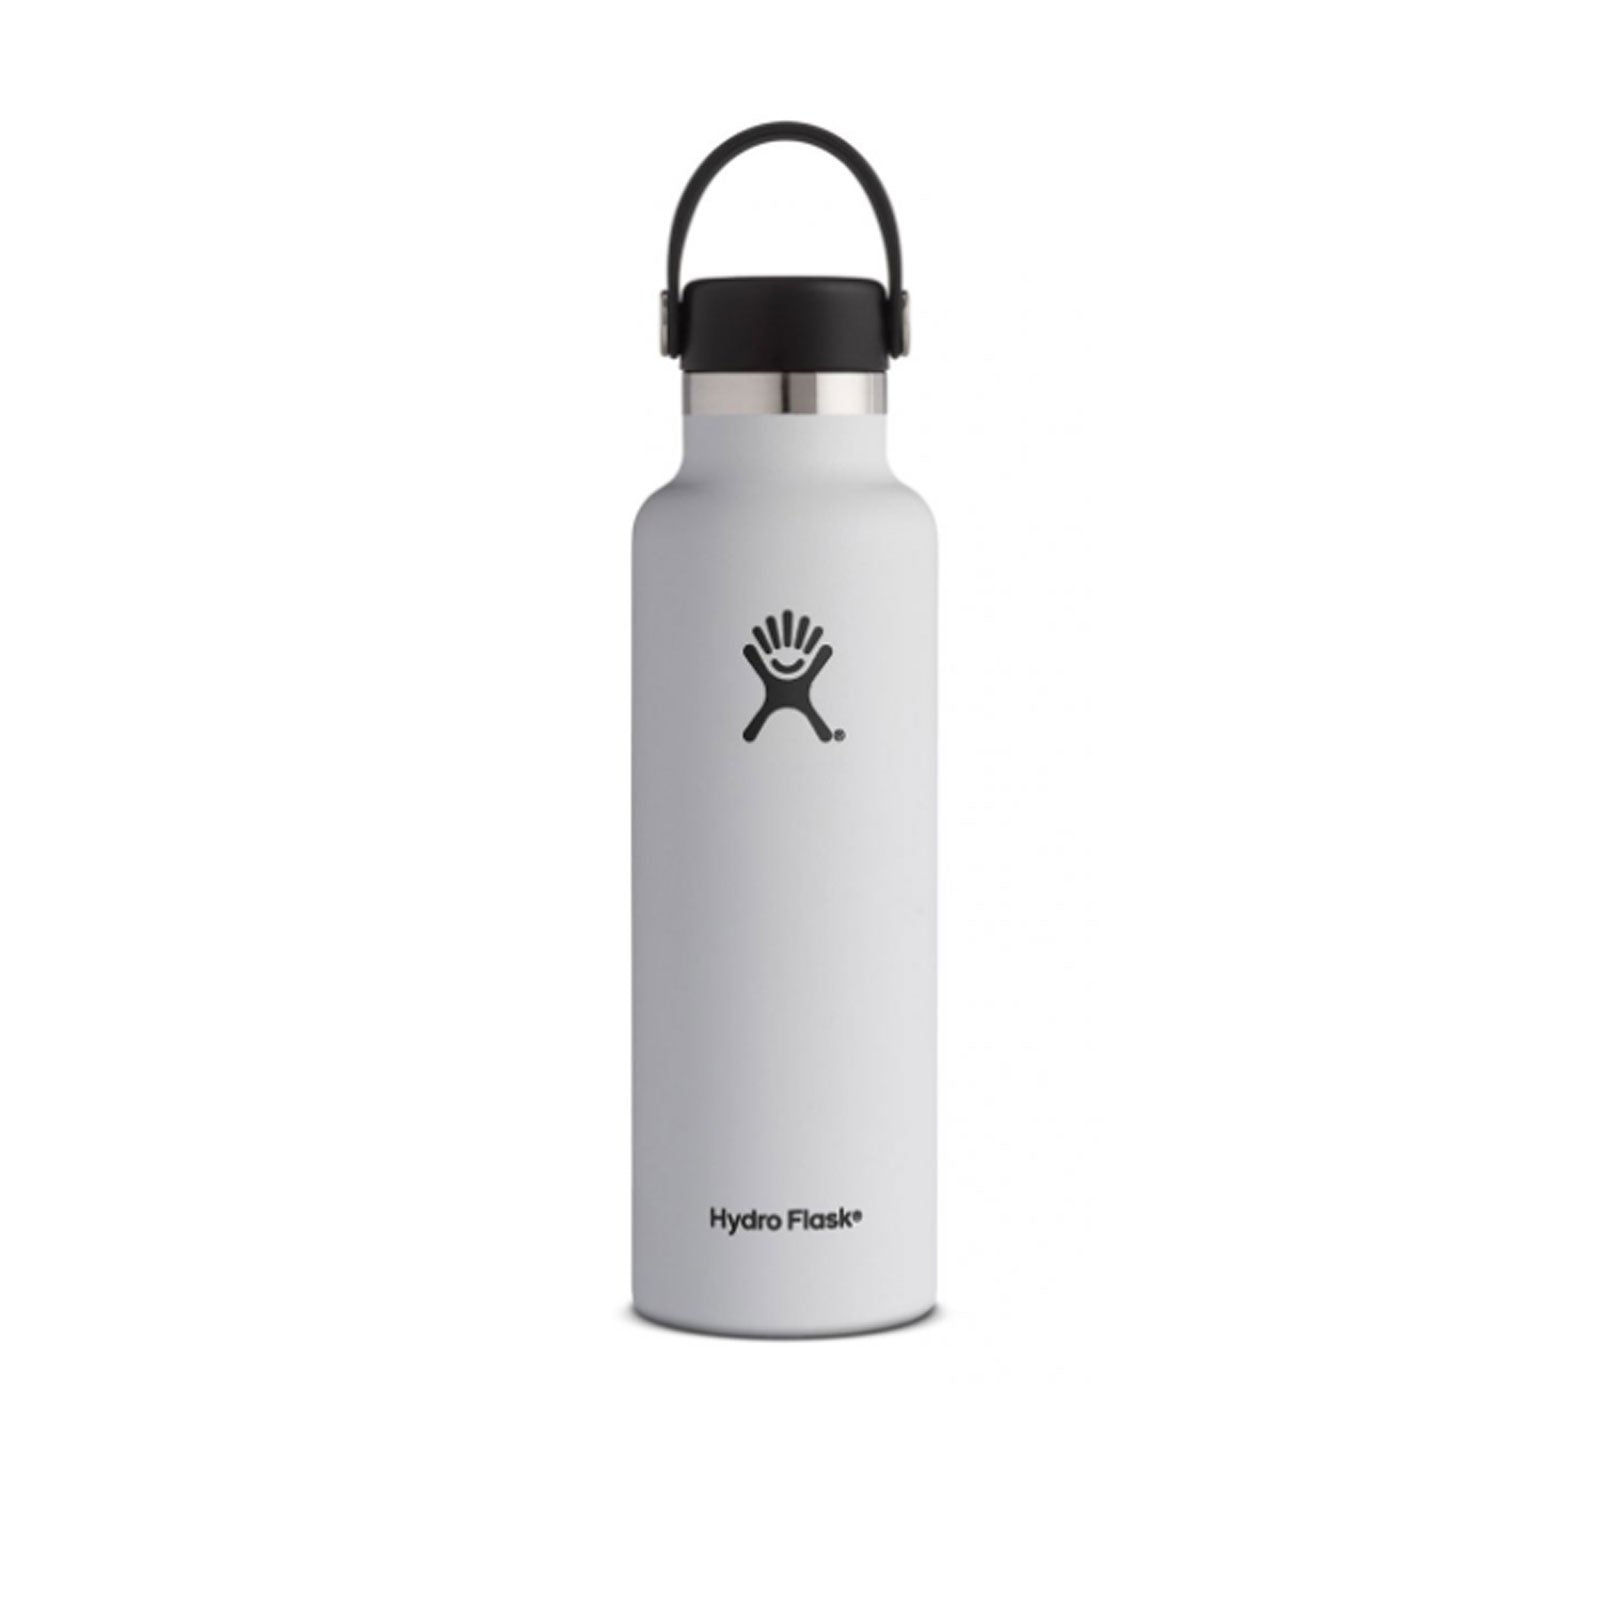 HydroFlask Standard Mouth with Flex Cap 21 oz - White – The Heel Shoe  Fitters